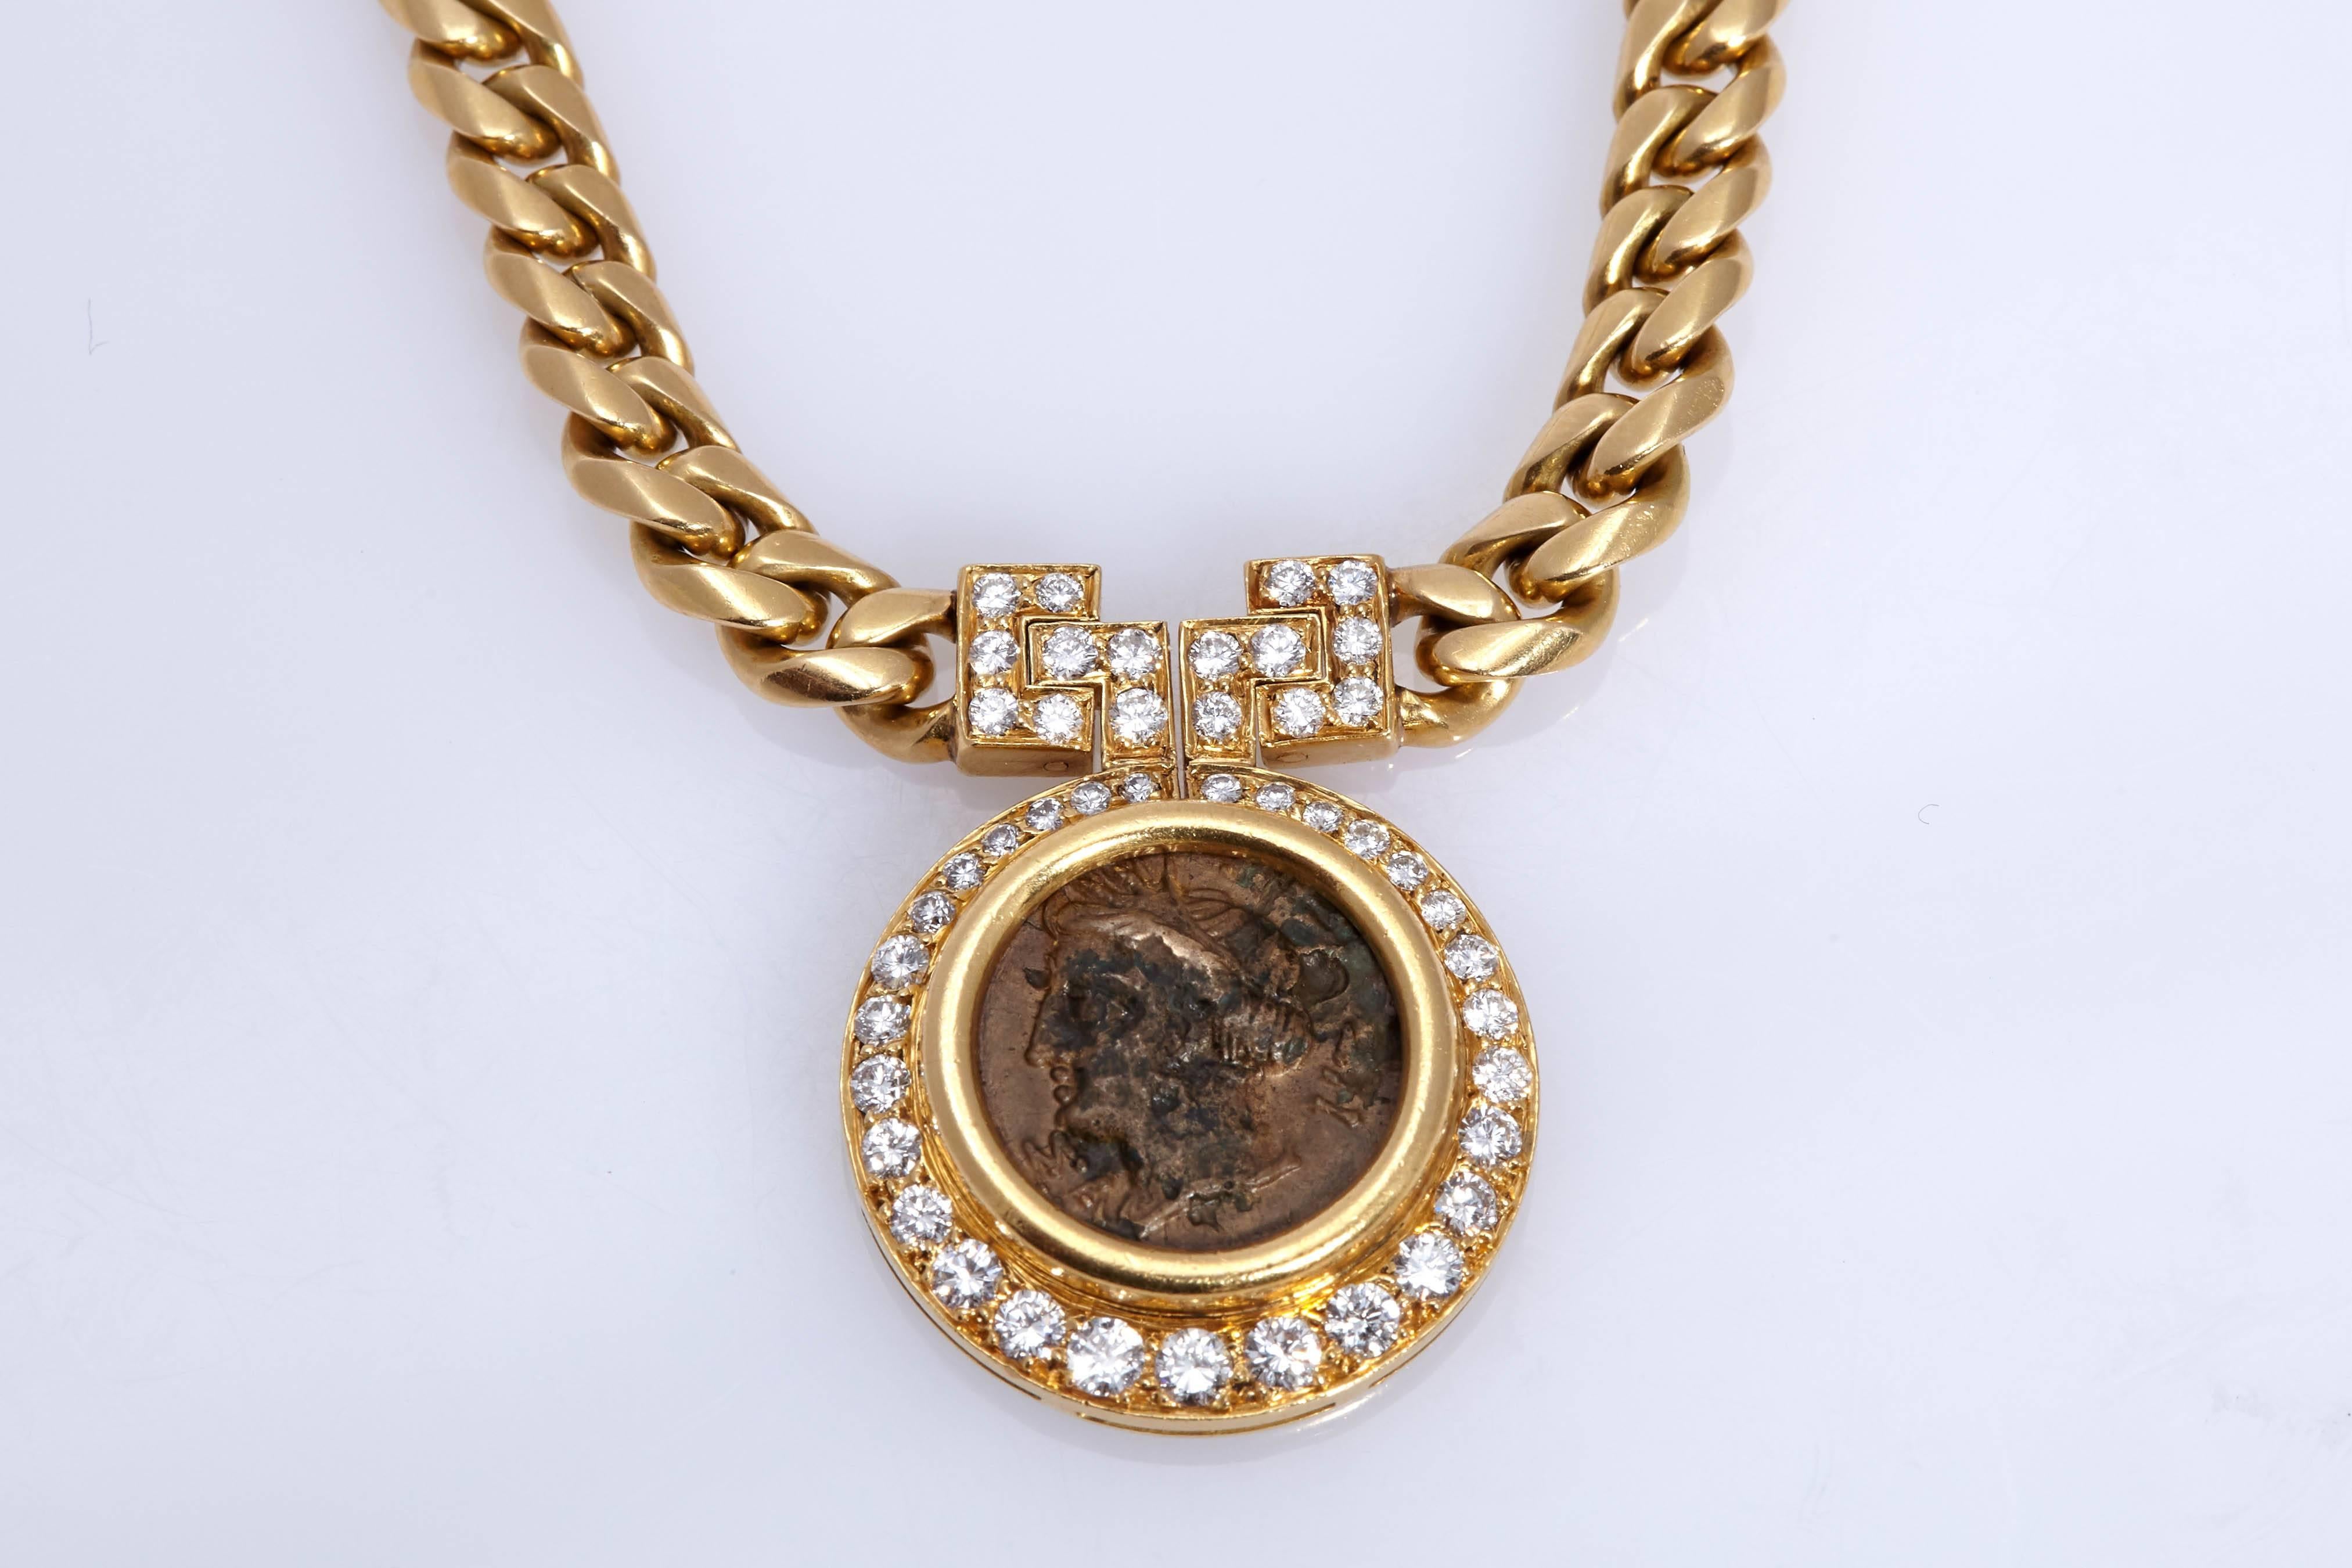 A Bulgari 18kt yellow gold curb link chain necklace suspending an antique Roman coin pendant surrounded by diamonds. Made in Italy, circa 1970s